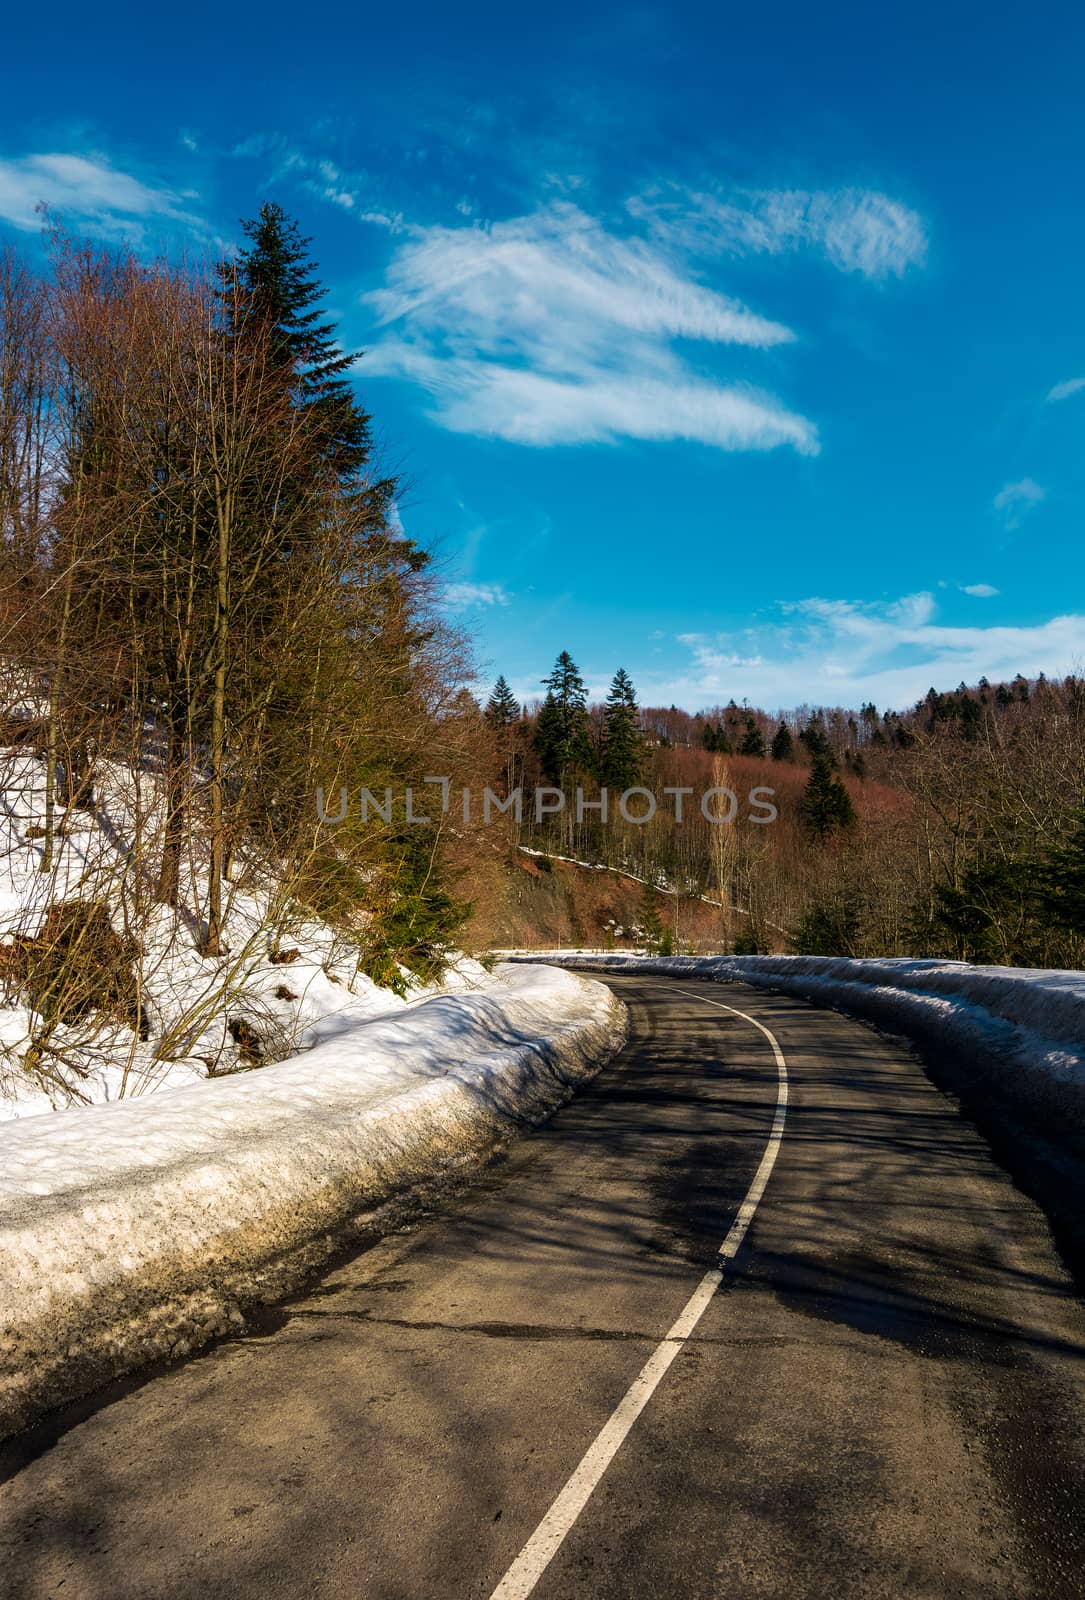 turnaround on the mountain road in winter by Pellinni